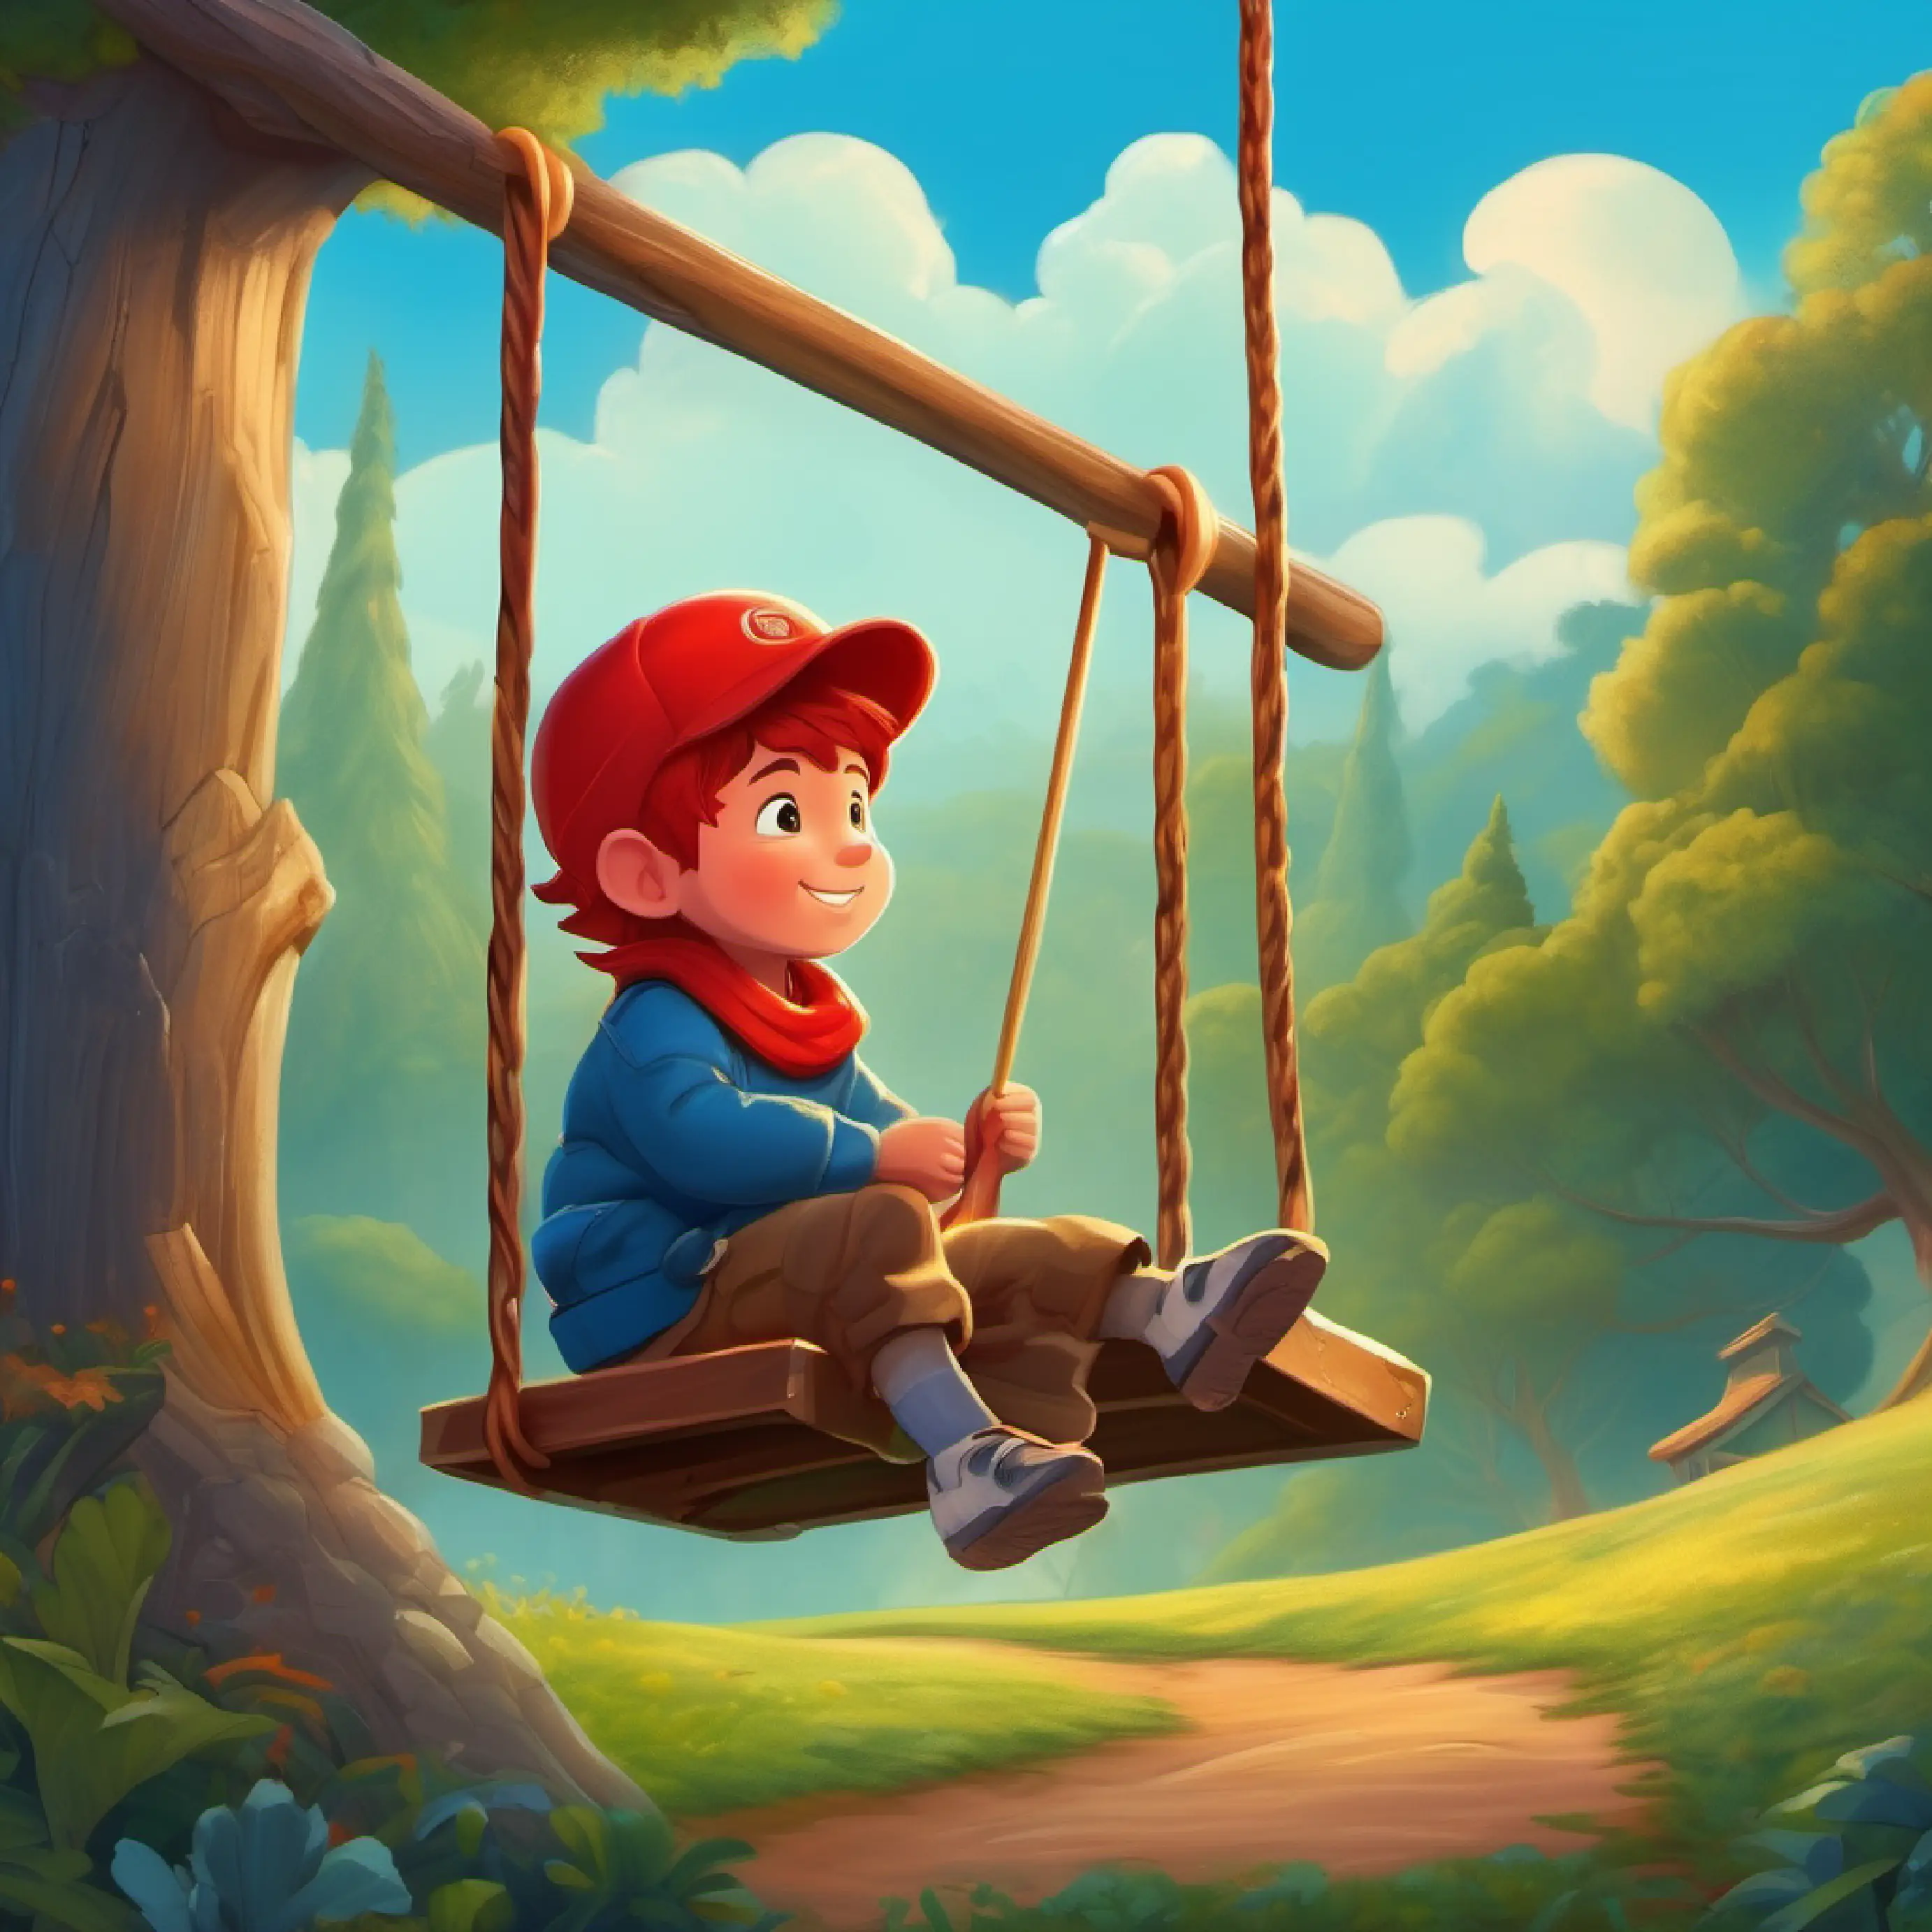 Brave boy, red cap, loves to explore, wears blue jeans finds a magical, self-swinging swing set